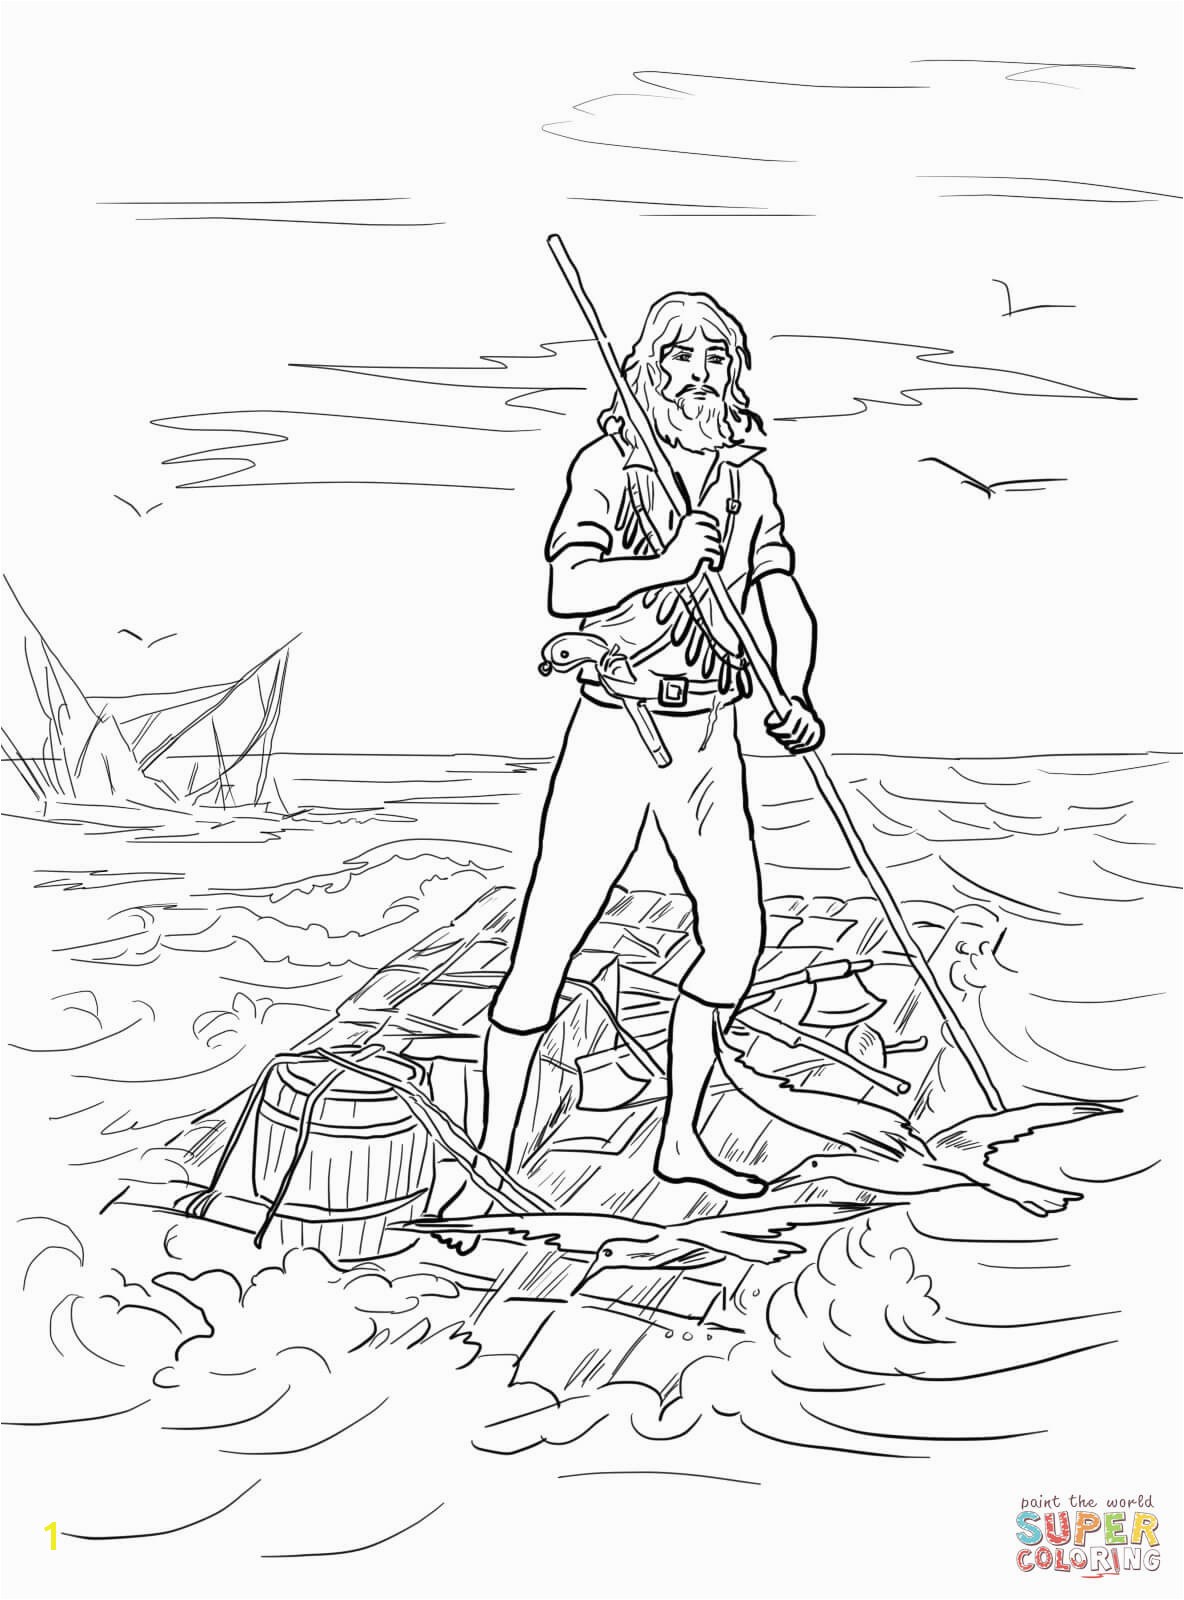 the Robinson Crusoe on a Raft after Shipwrecked coloring pages